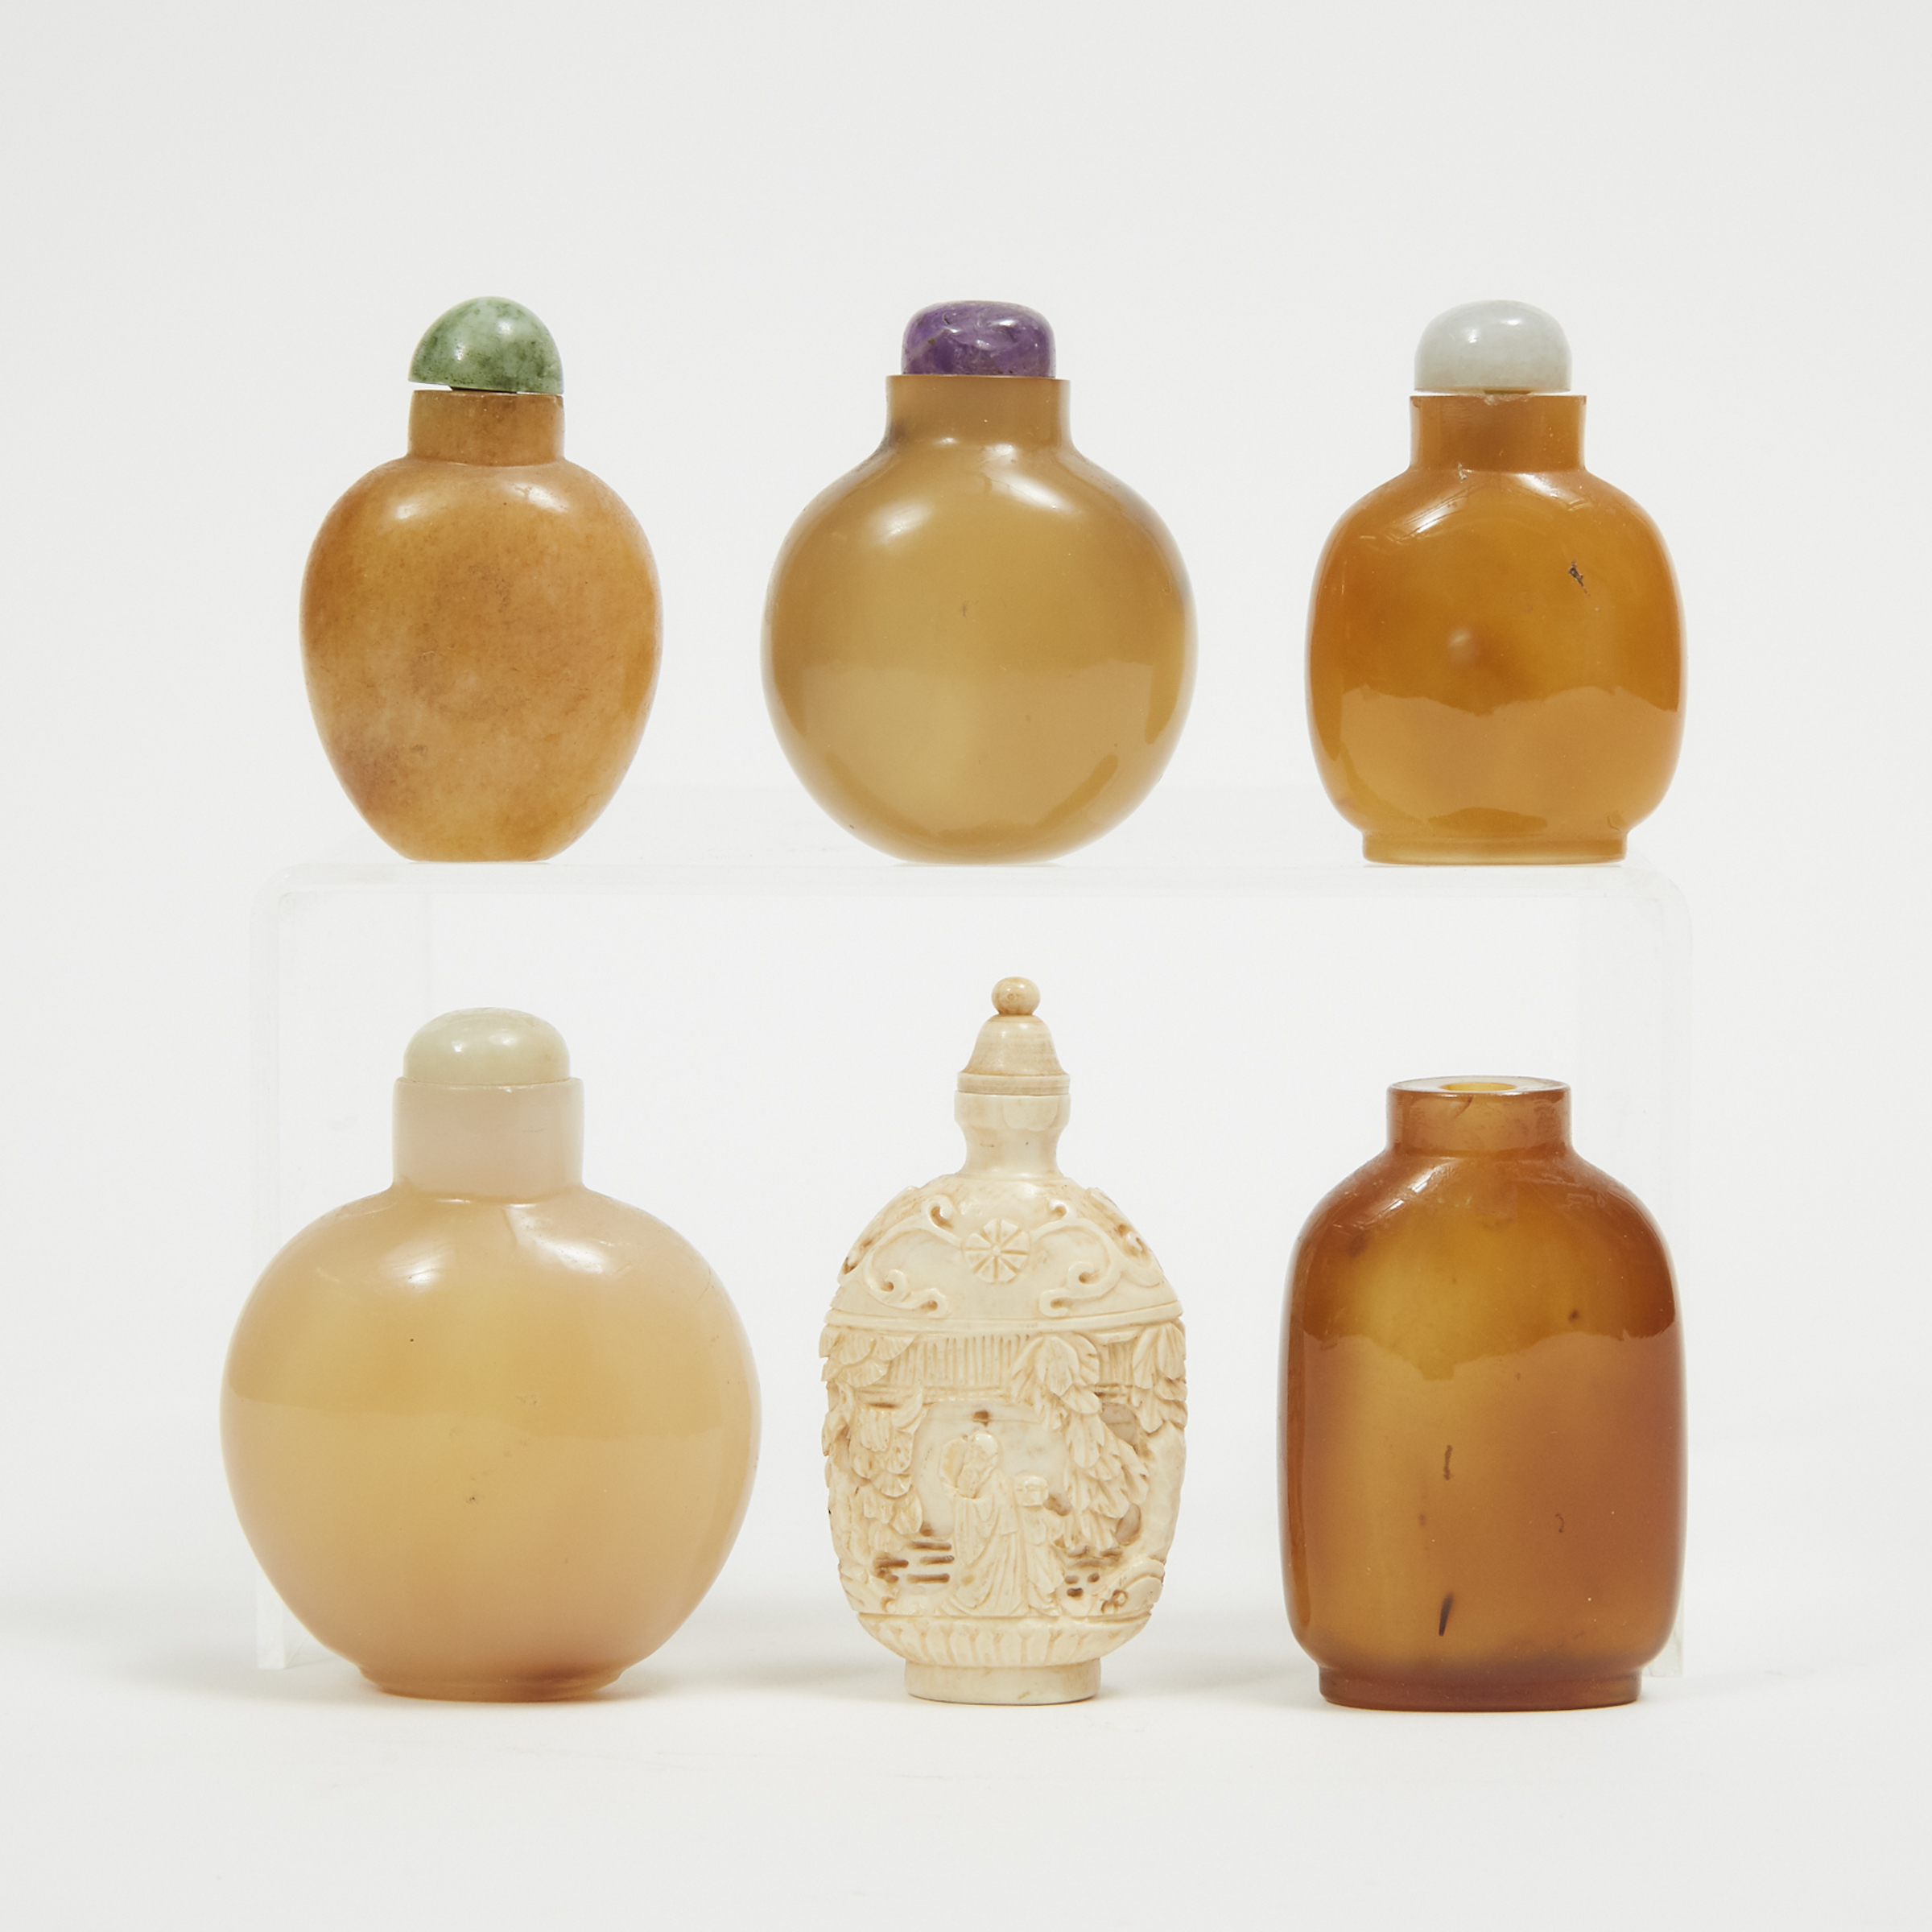 A Group of Six Snuff Bottles, 19th Century